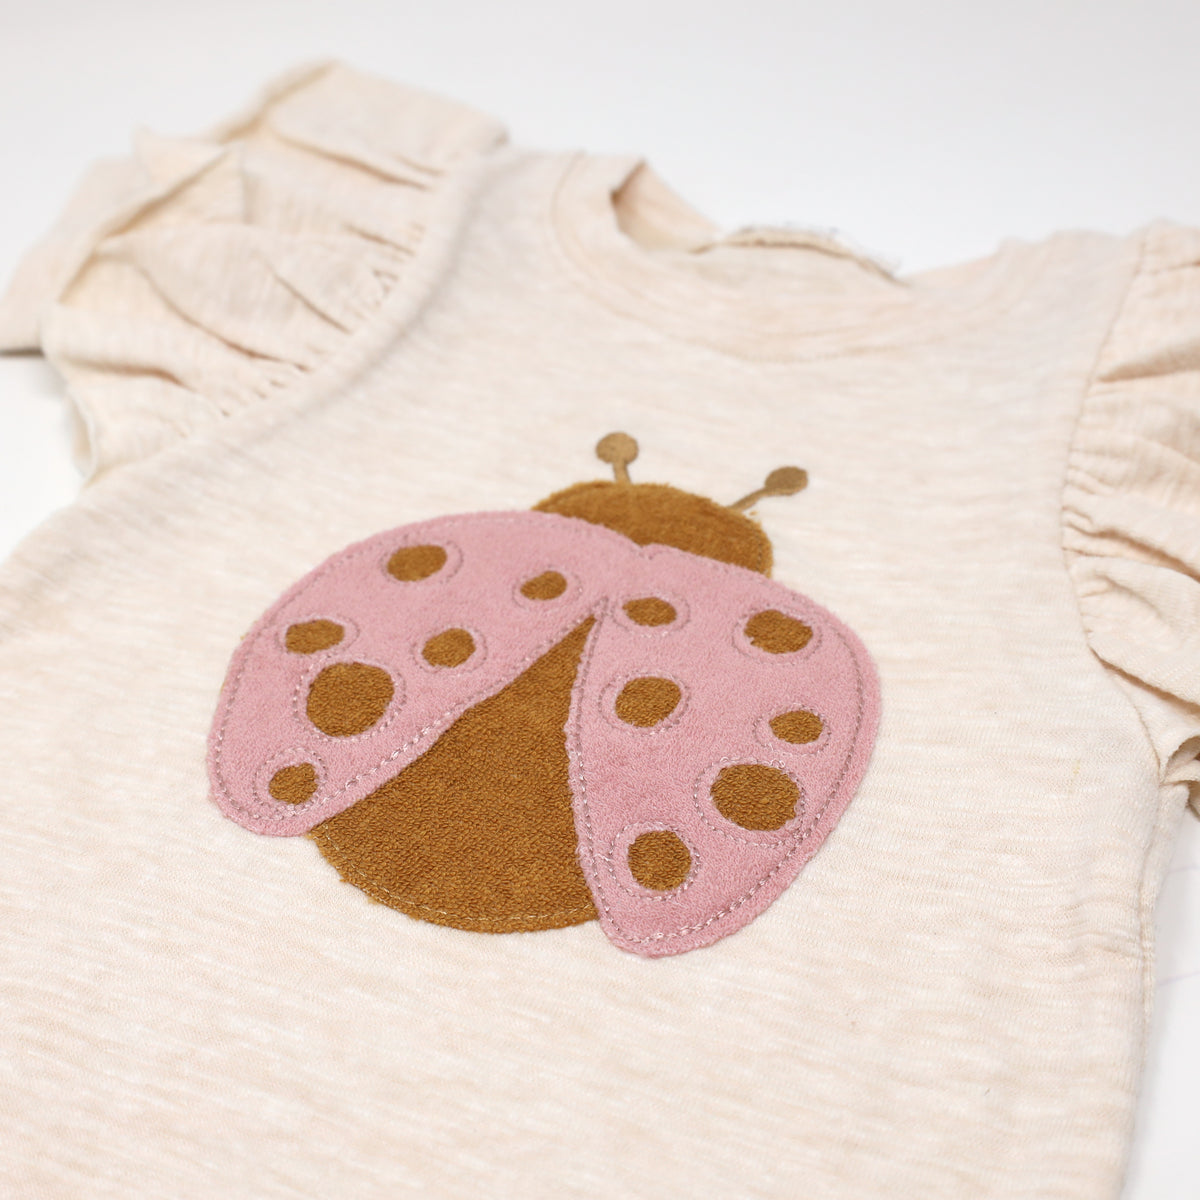 oh baby! Butterfly Sleeve Tee and Terry Ruffle Tushie - Ladybug - Blush